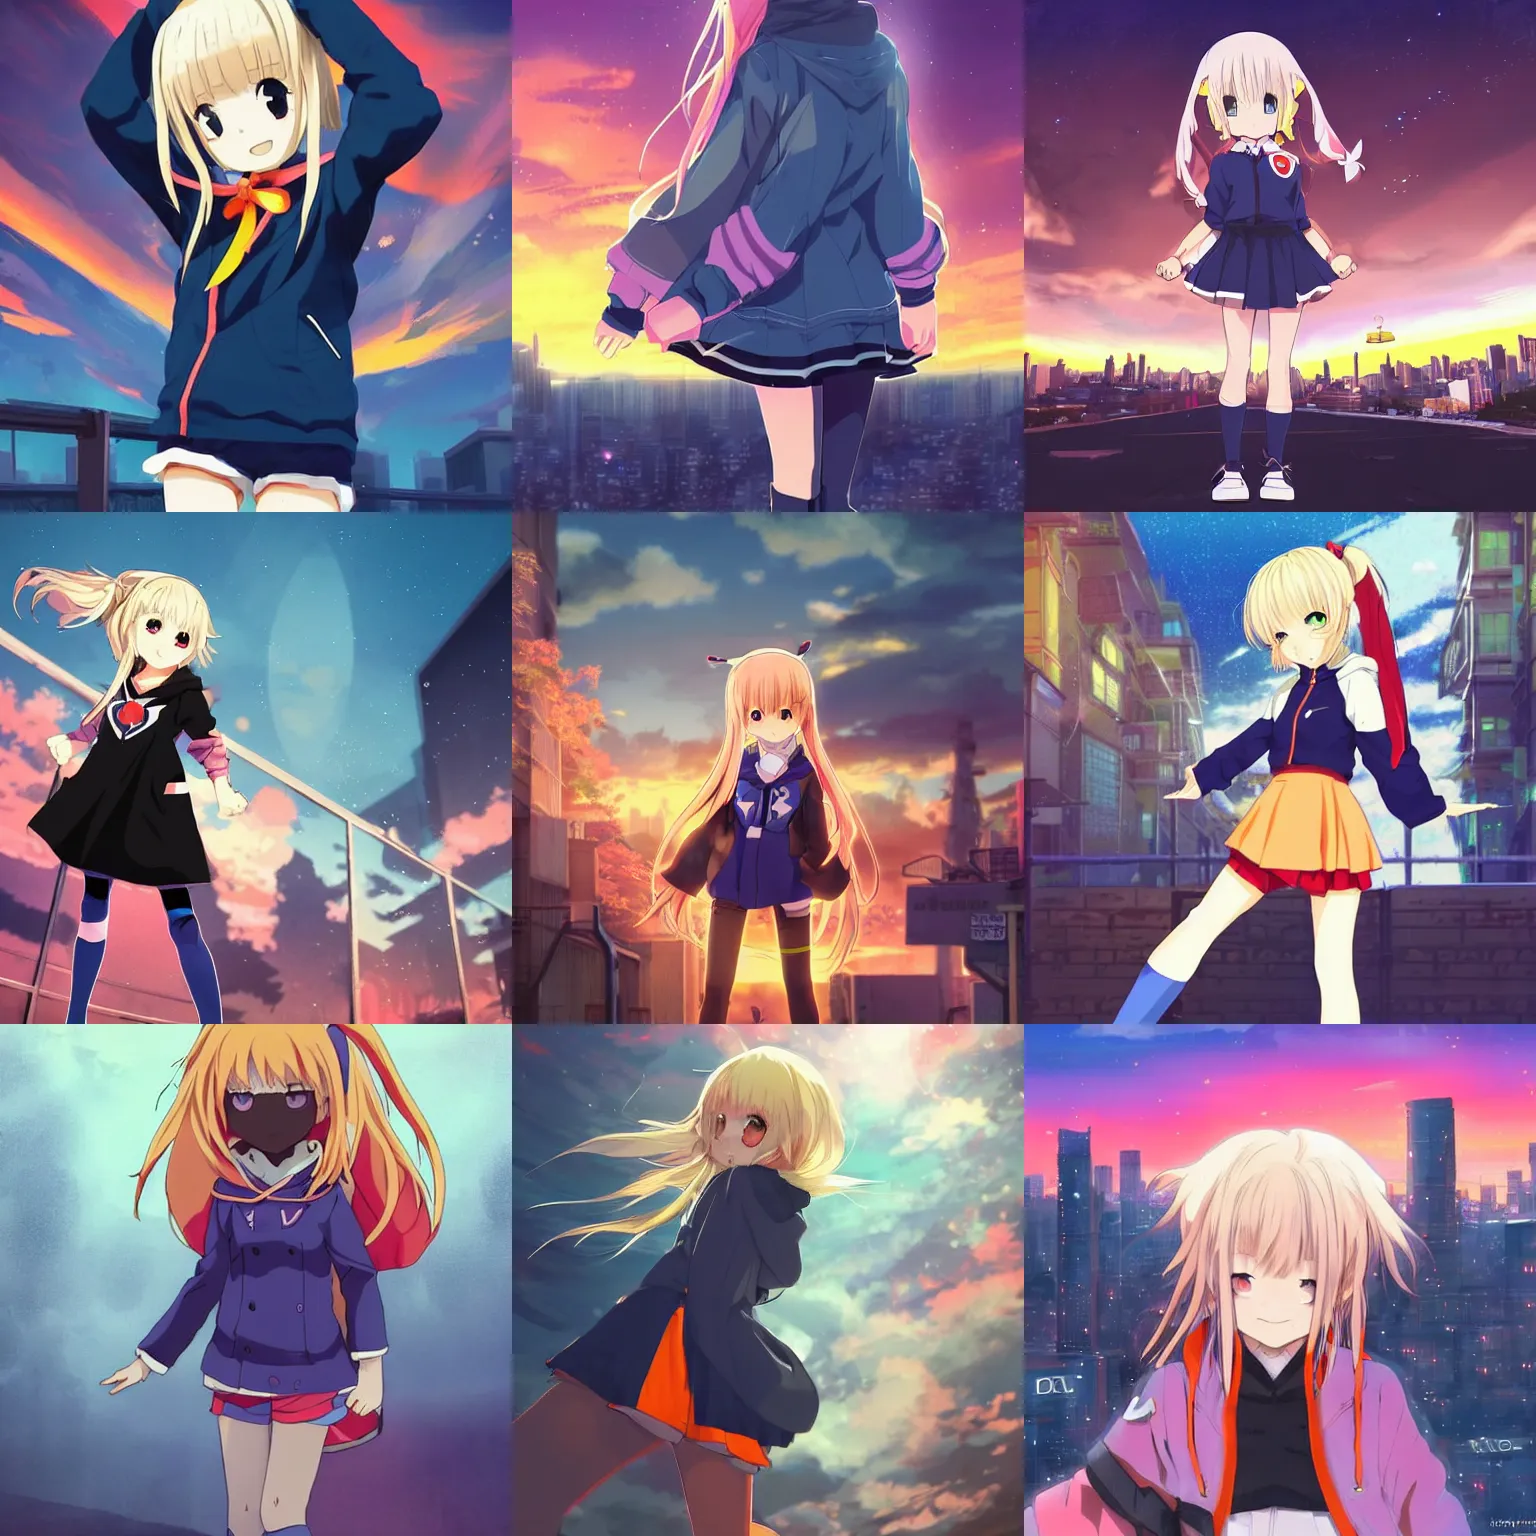 Prompt: Astonishing Pixiv 8K Splash art of an Anime Key Visual Pinterest loli with blond hair and cute pigtails, who wears a blue coat with a hood and black shorts , practicing parkour through a big modern city in twilight from Unsplash. She does a superhero pose against a cinematic dark scene of an HDR sunset with faint orange light in Studio Ghibli style, amazing piece, trending on Artstation, DeviantArt.